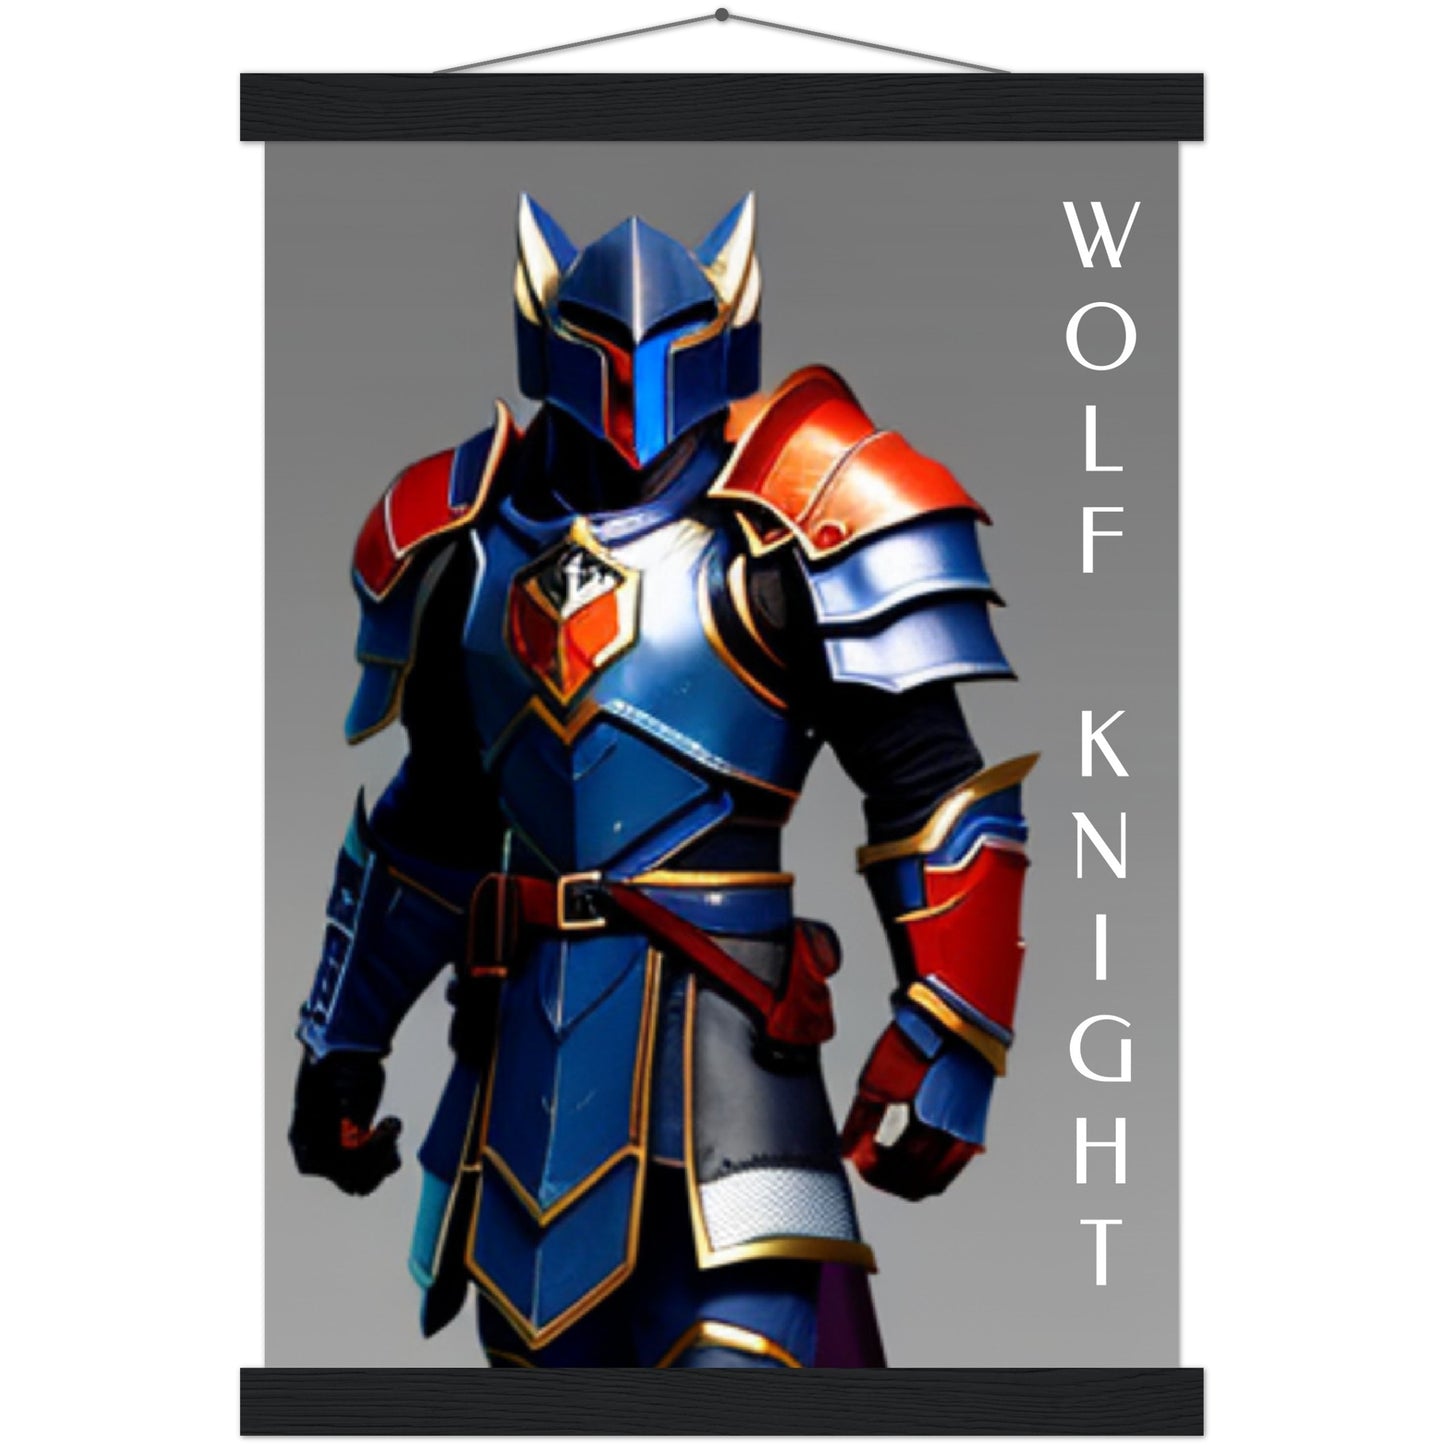 Wolf Knight - Classic Semi-Glossy Paper Poster with Hanger